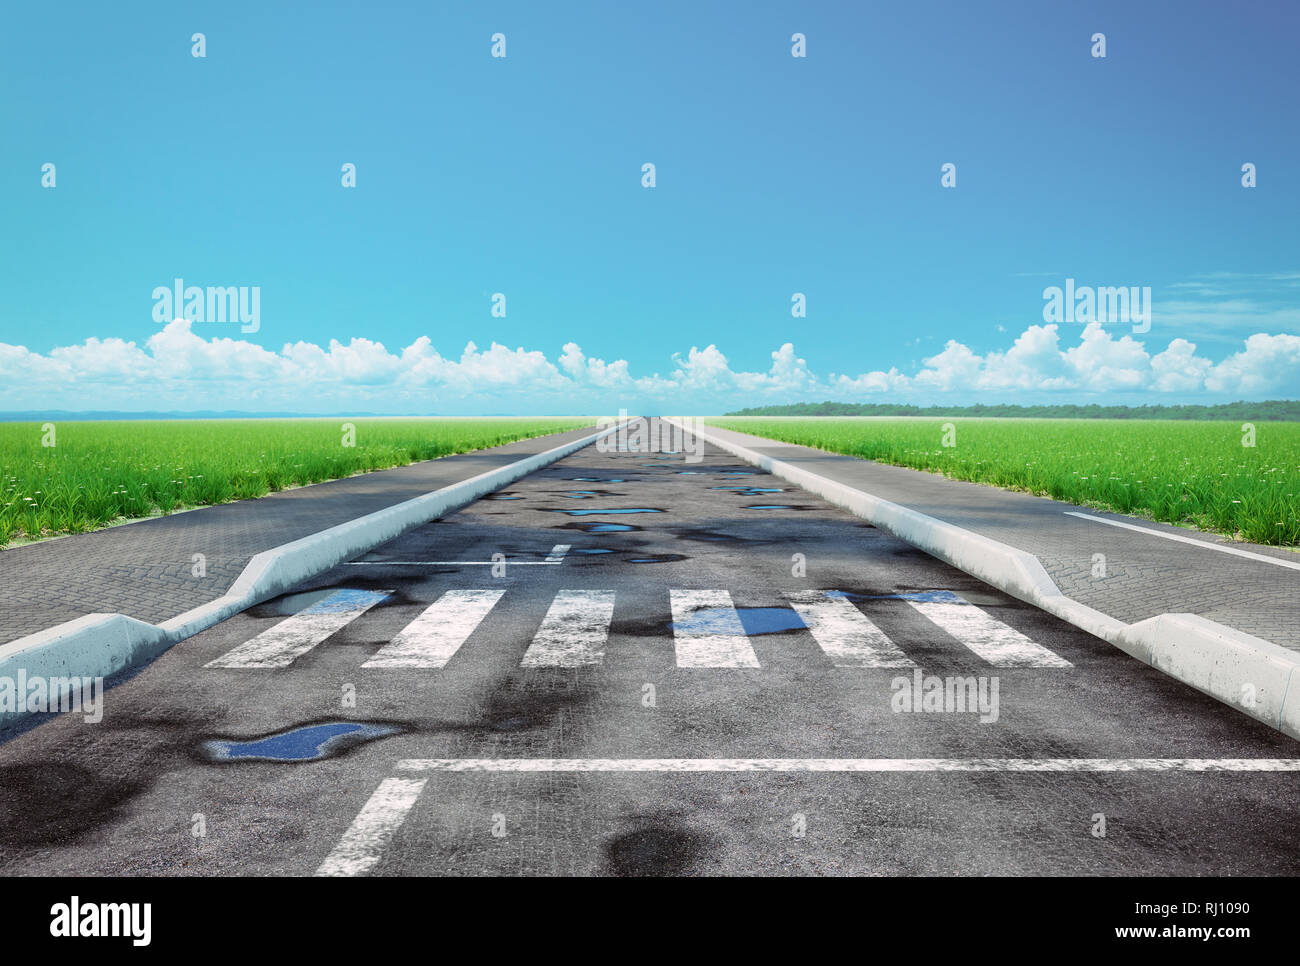 547,508 Road Crossing Images, Stock Photos, 3D objects, & Vectors